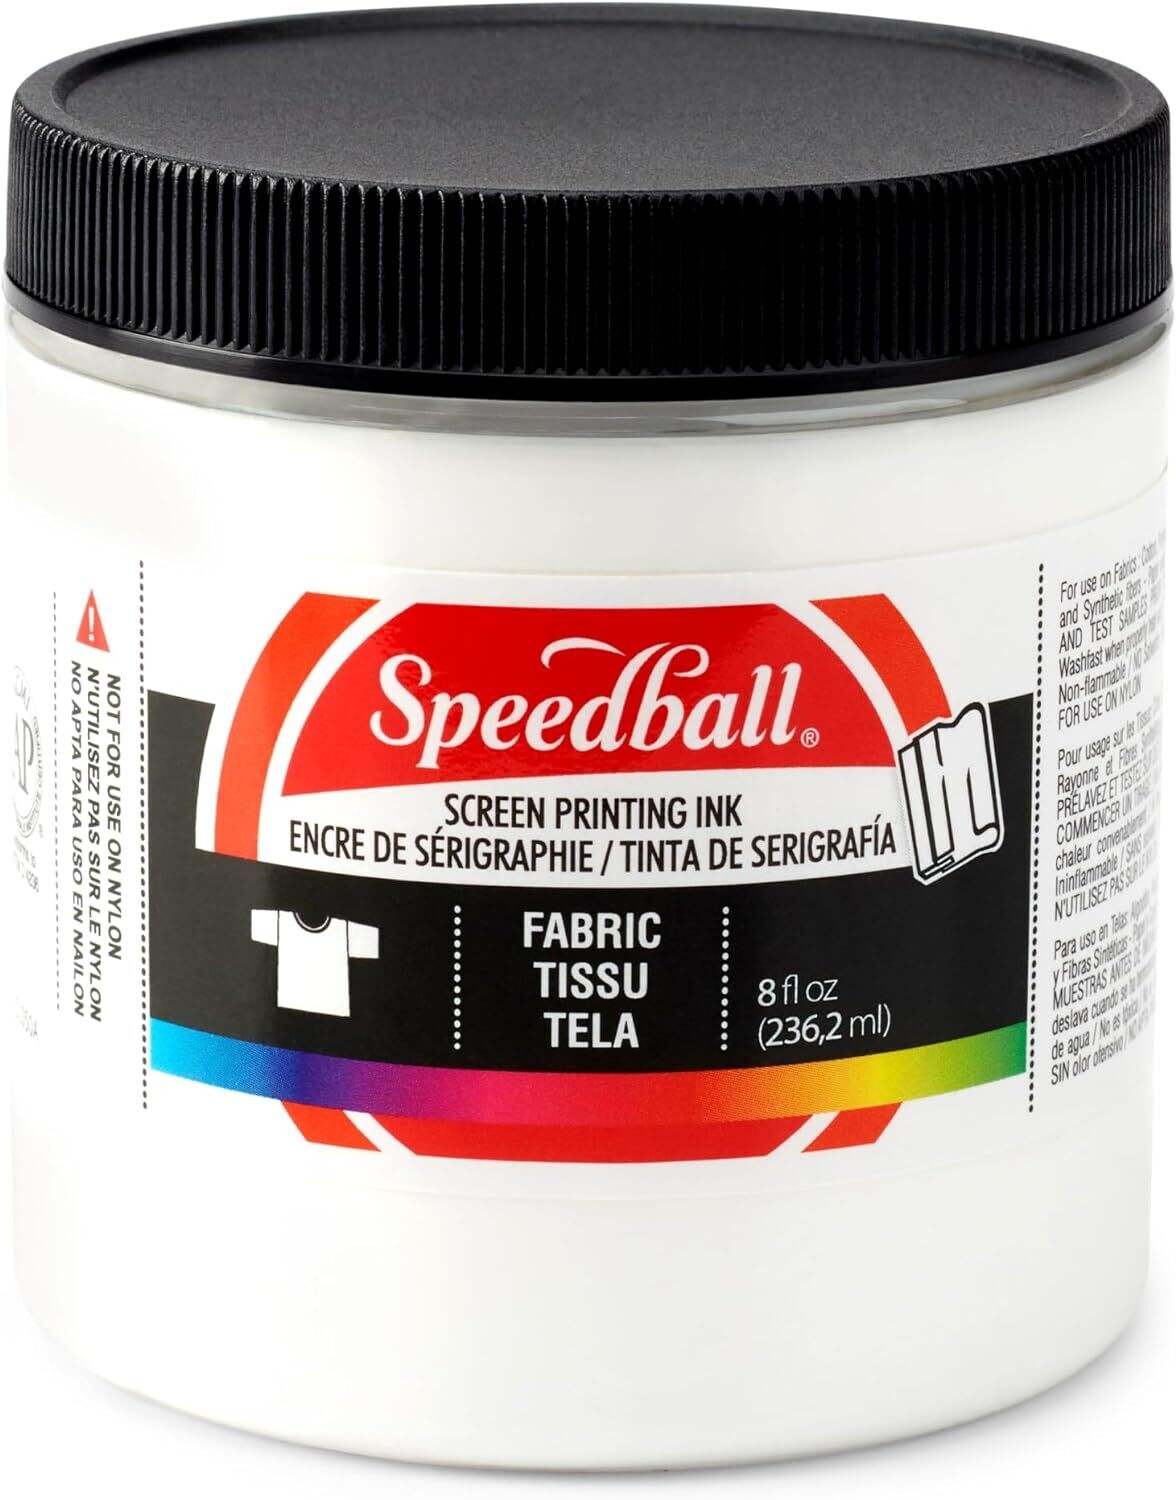 Speedball Fabric Screen Printing Ink, Pearly white (Opaque), 8 fl oz